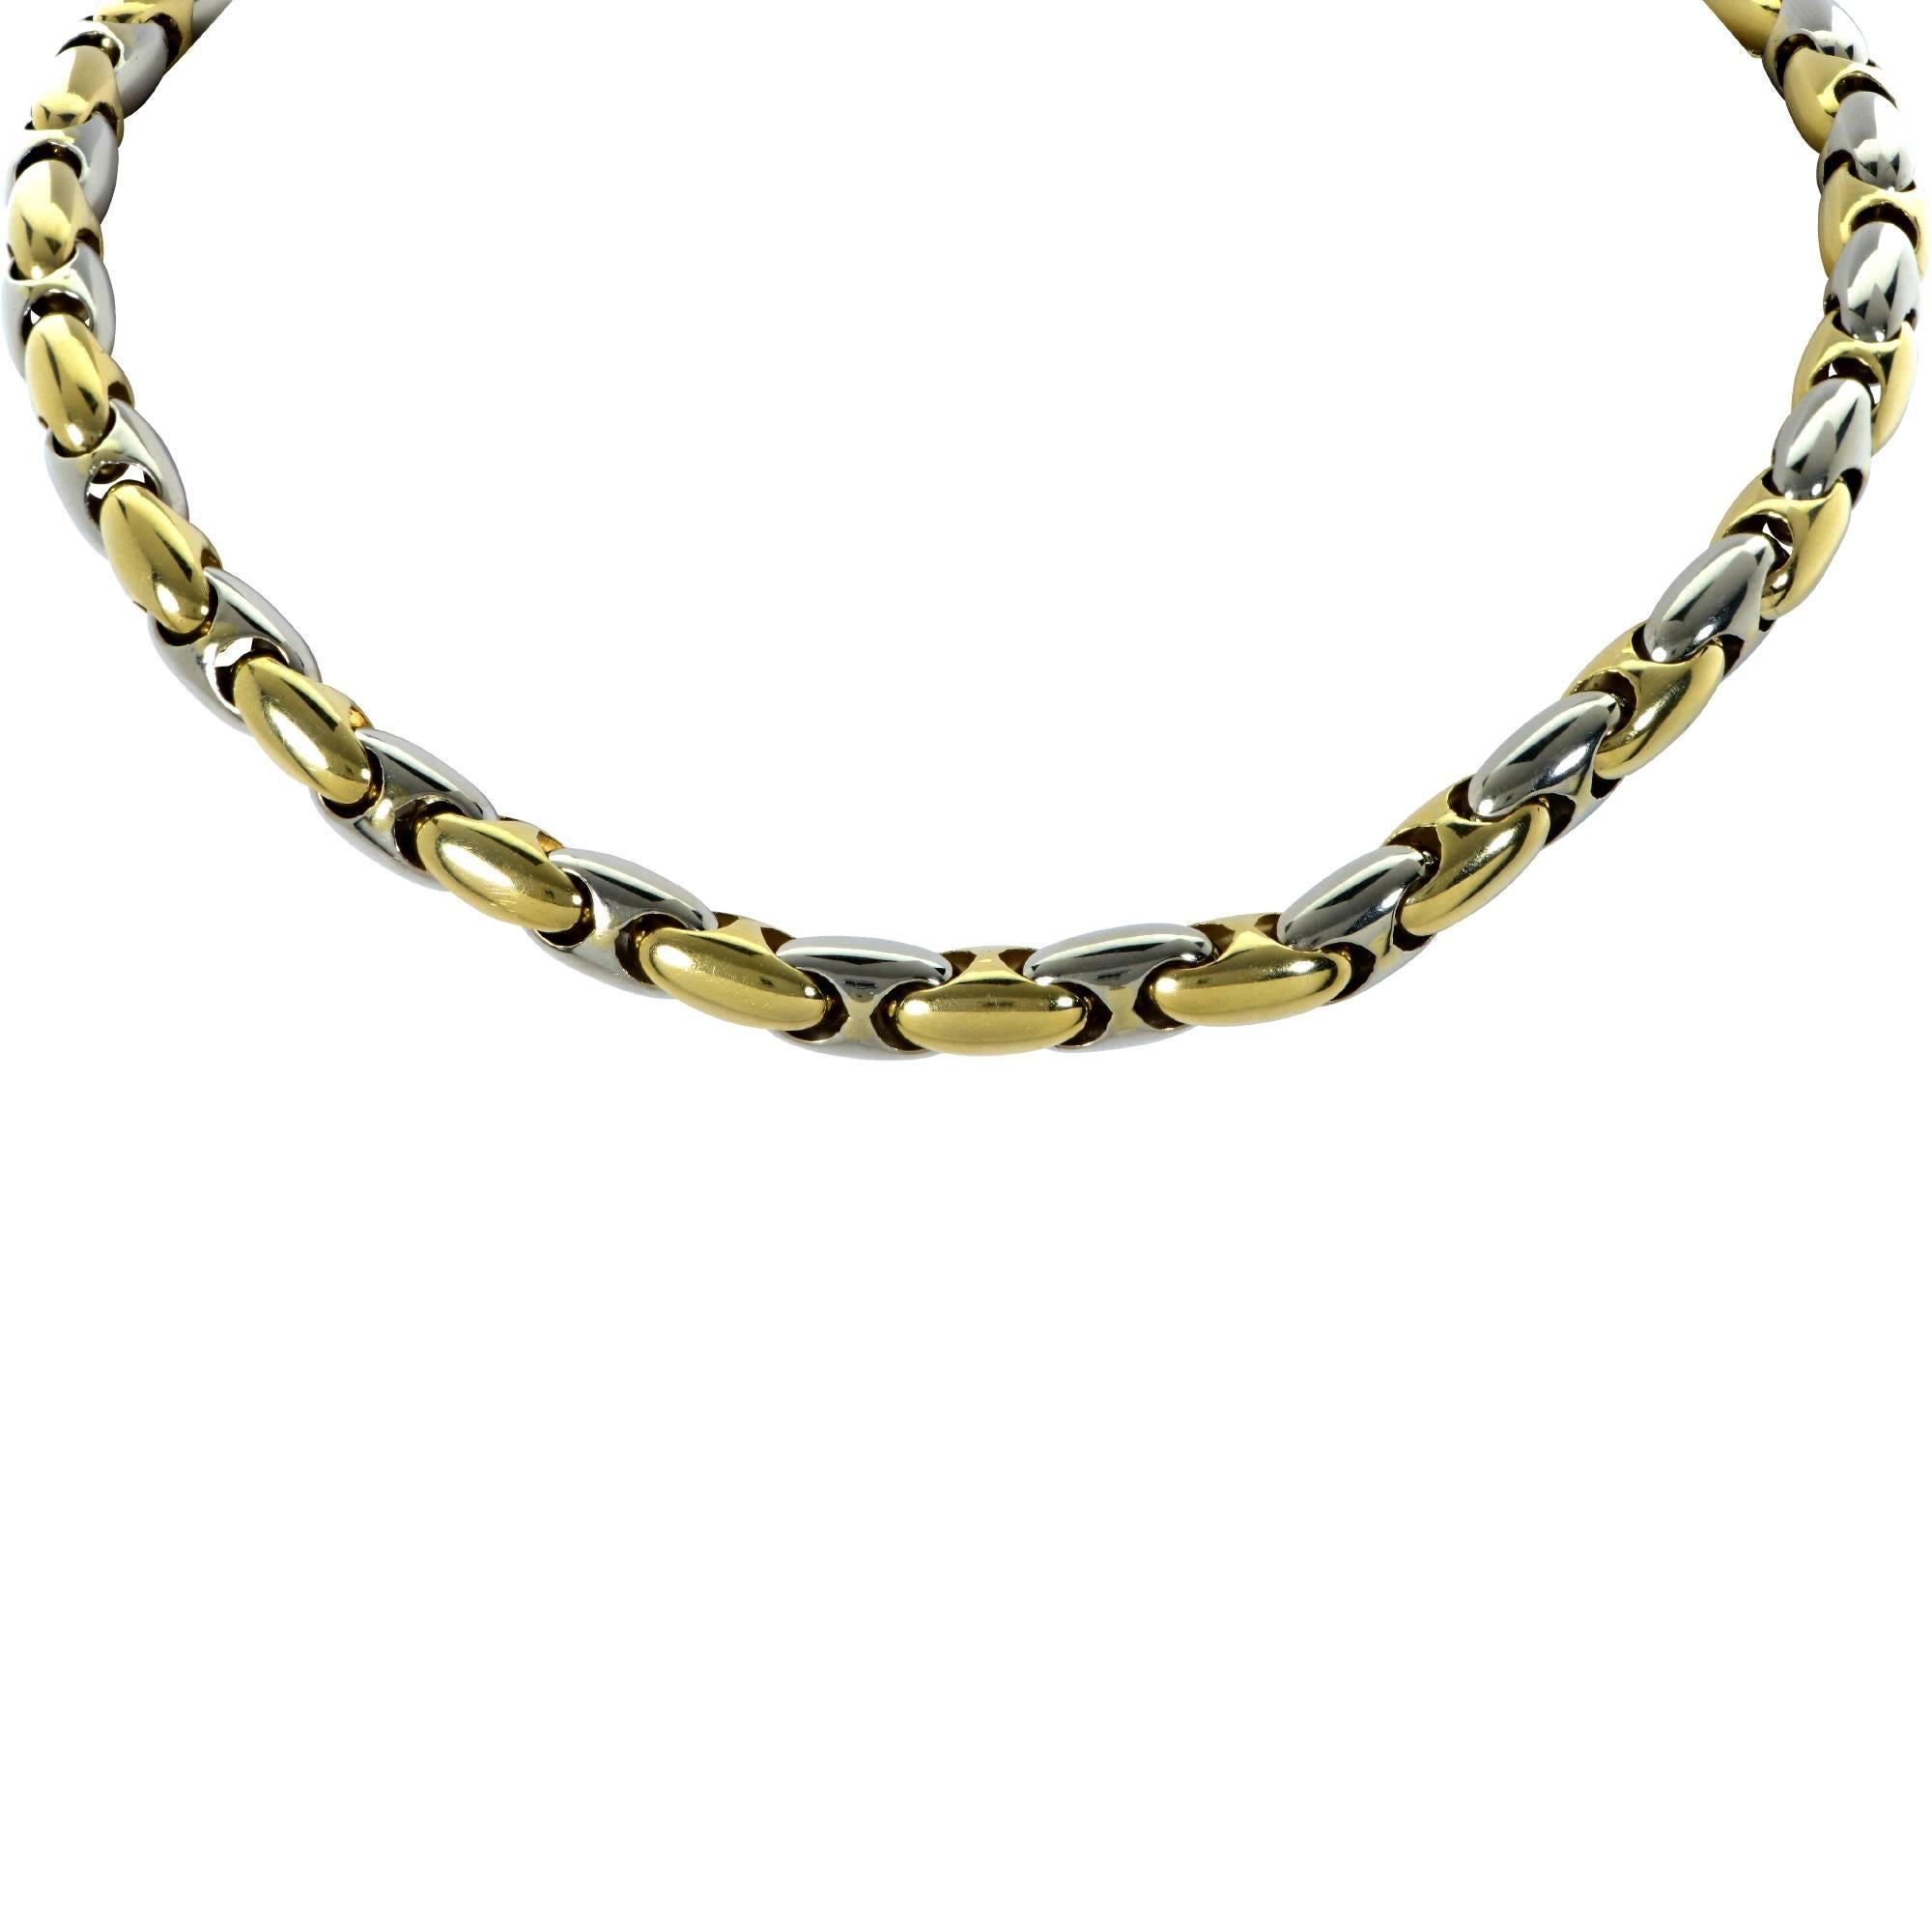 18k white and yellow gold Chimento necklace.

The necklace measures 16 inches long.
It is stamped and/or tested as 18k gold.
The metal weight is 61 grams.

Our pieces are all accompanied by an appraisal performed by one of our in-house GIA